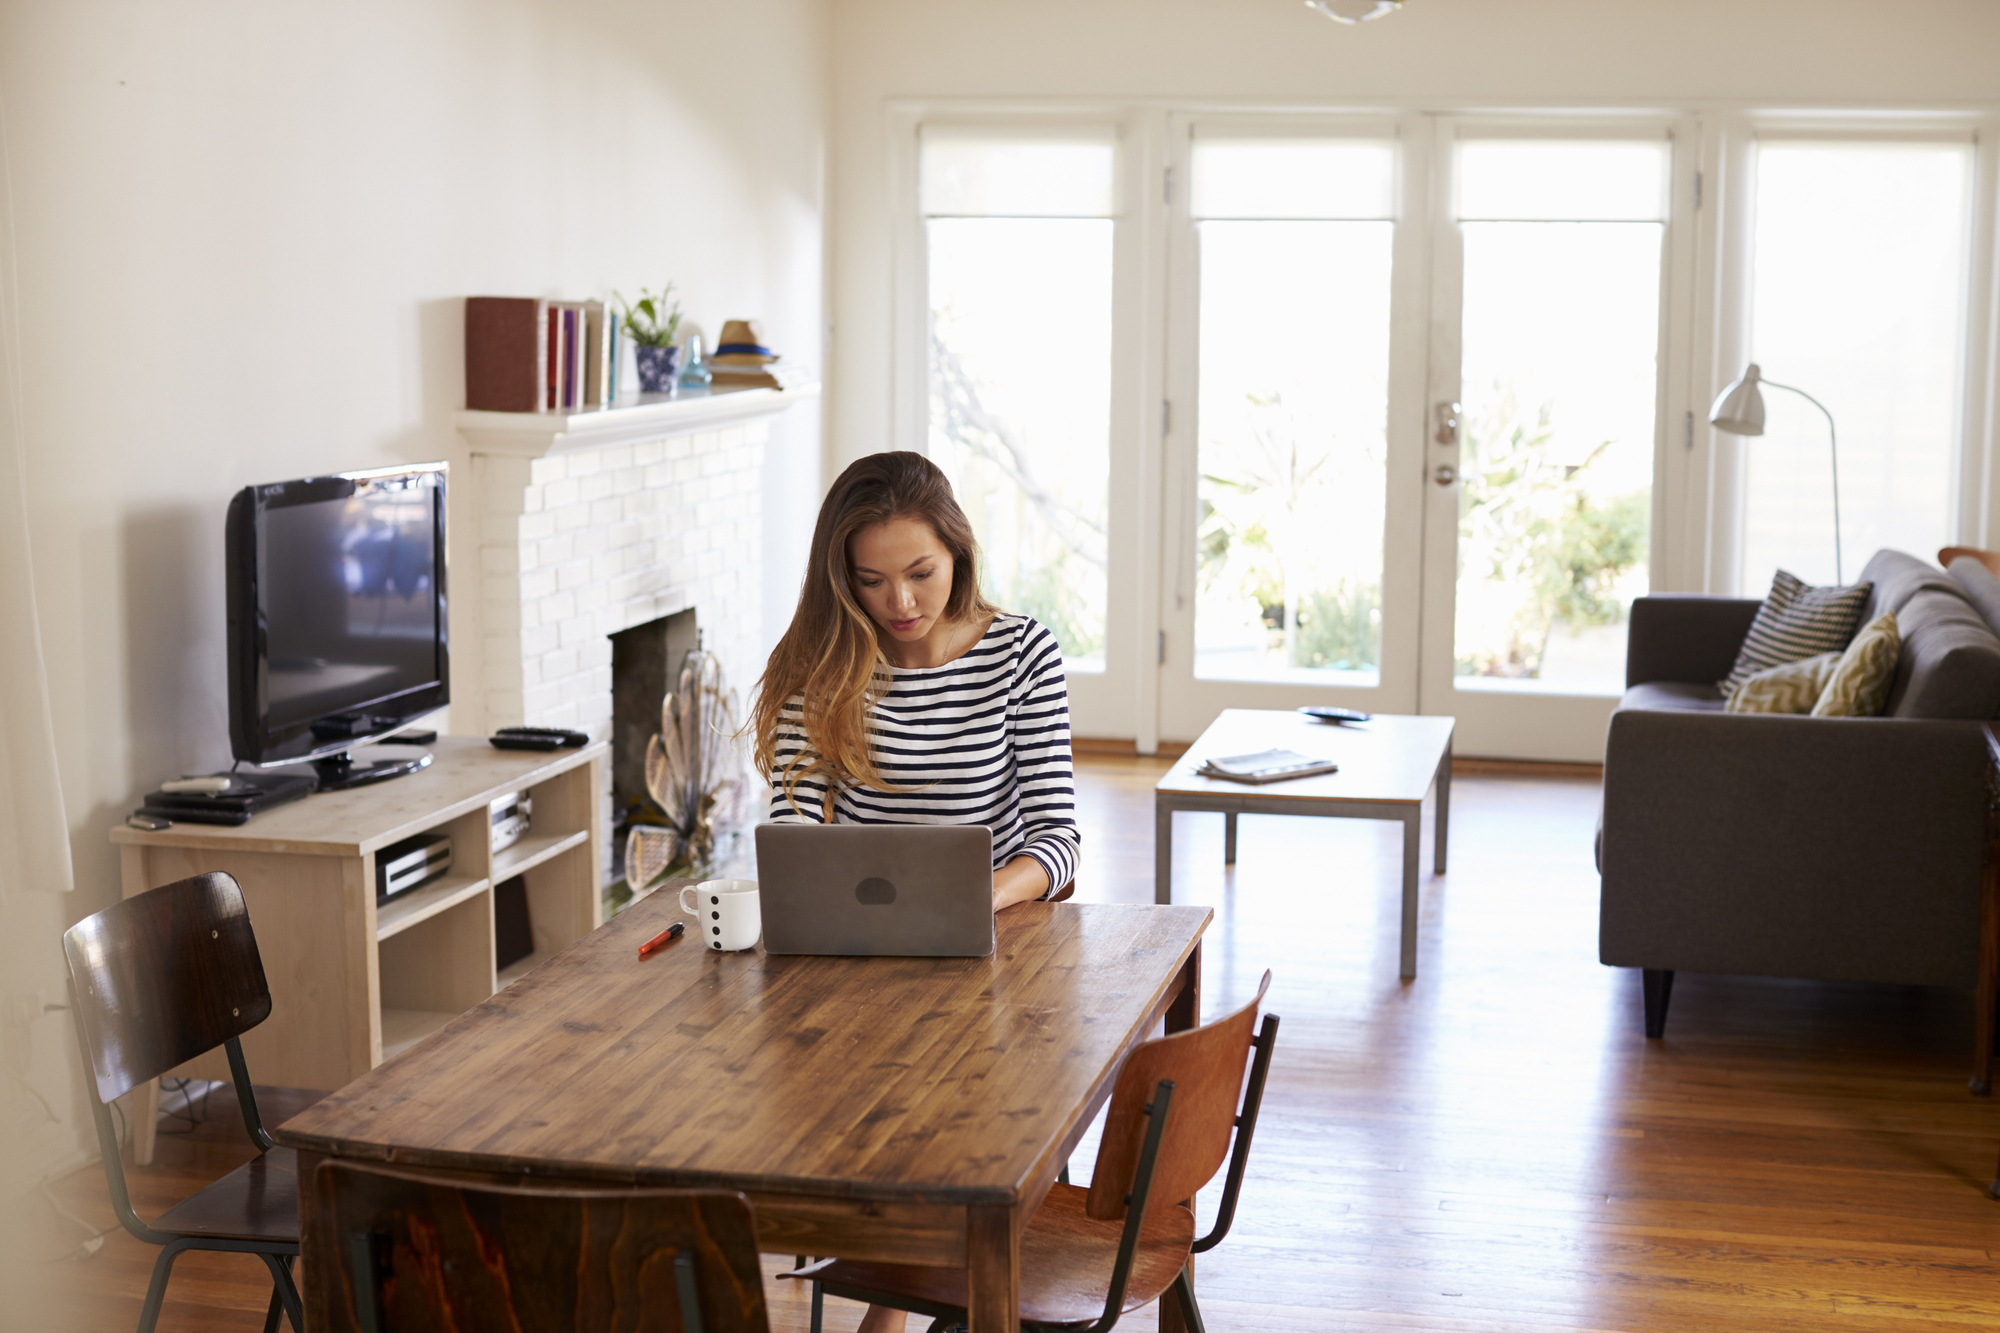 A person works remotely from their home in their dining area at the table.